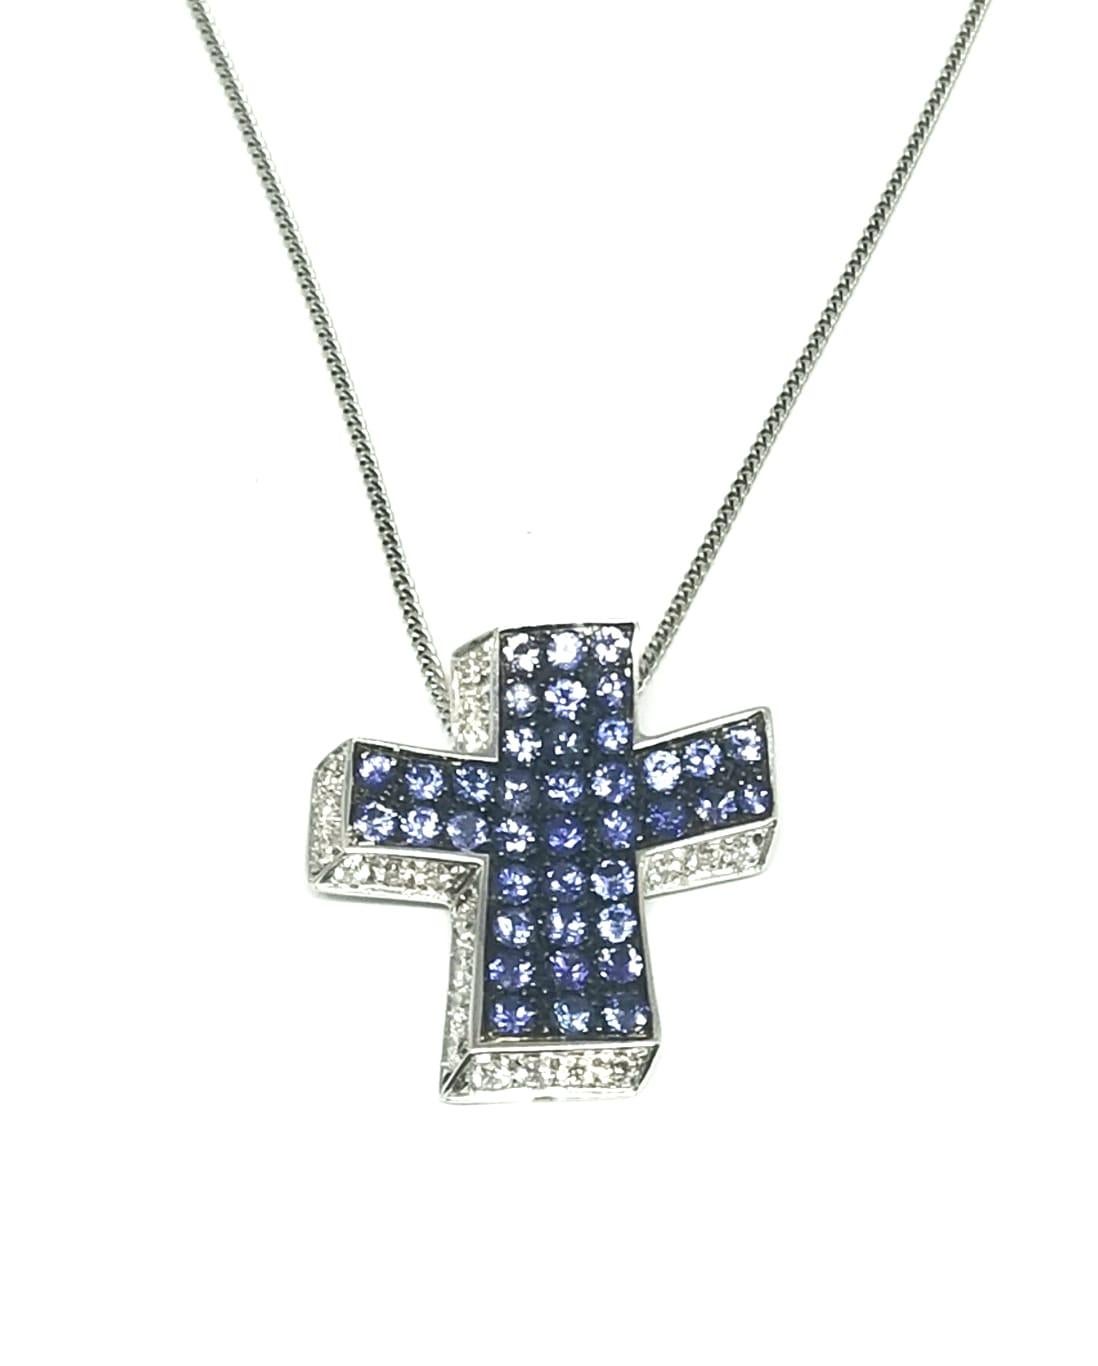 Andreoli Diamond Blue Sapphire 18 Karat Gold Cross Pendant Necklace

This pendant features:
- 0.52 Carat Diamond
- 2.79 Carat Blue Sapphire
- 9.10 Gram 18K White Gold
- Made In Italy